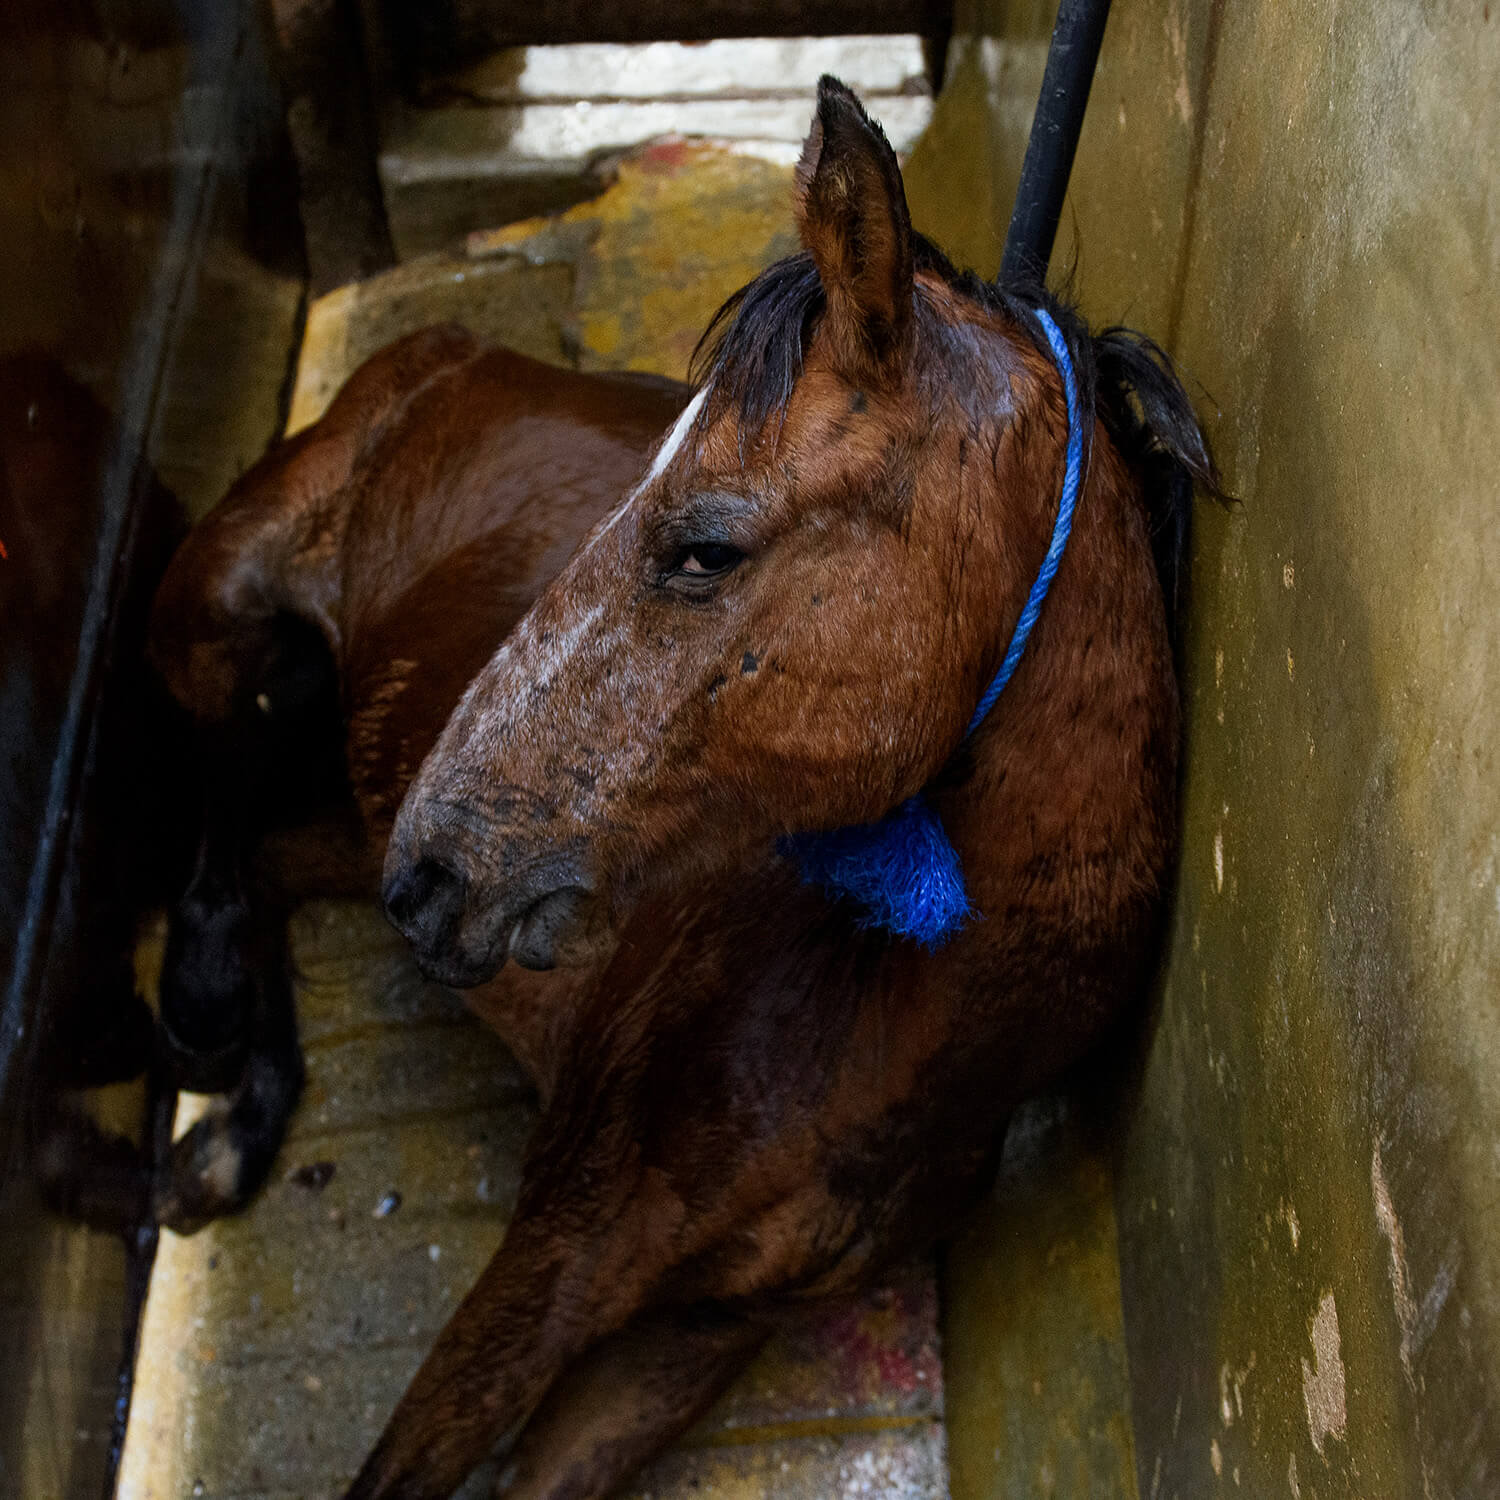 A horse in a slaughterhouse